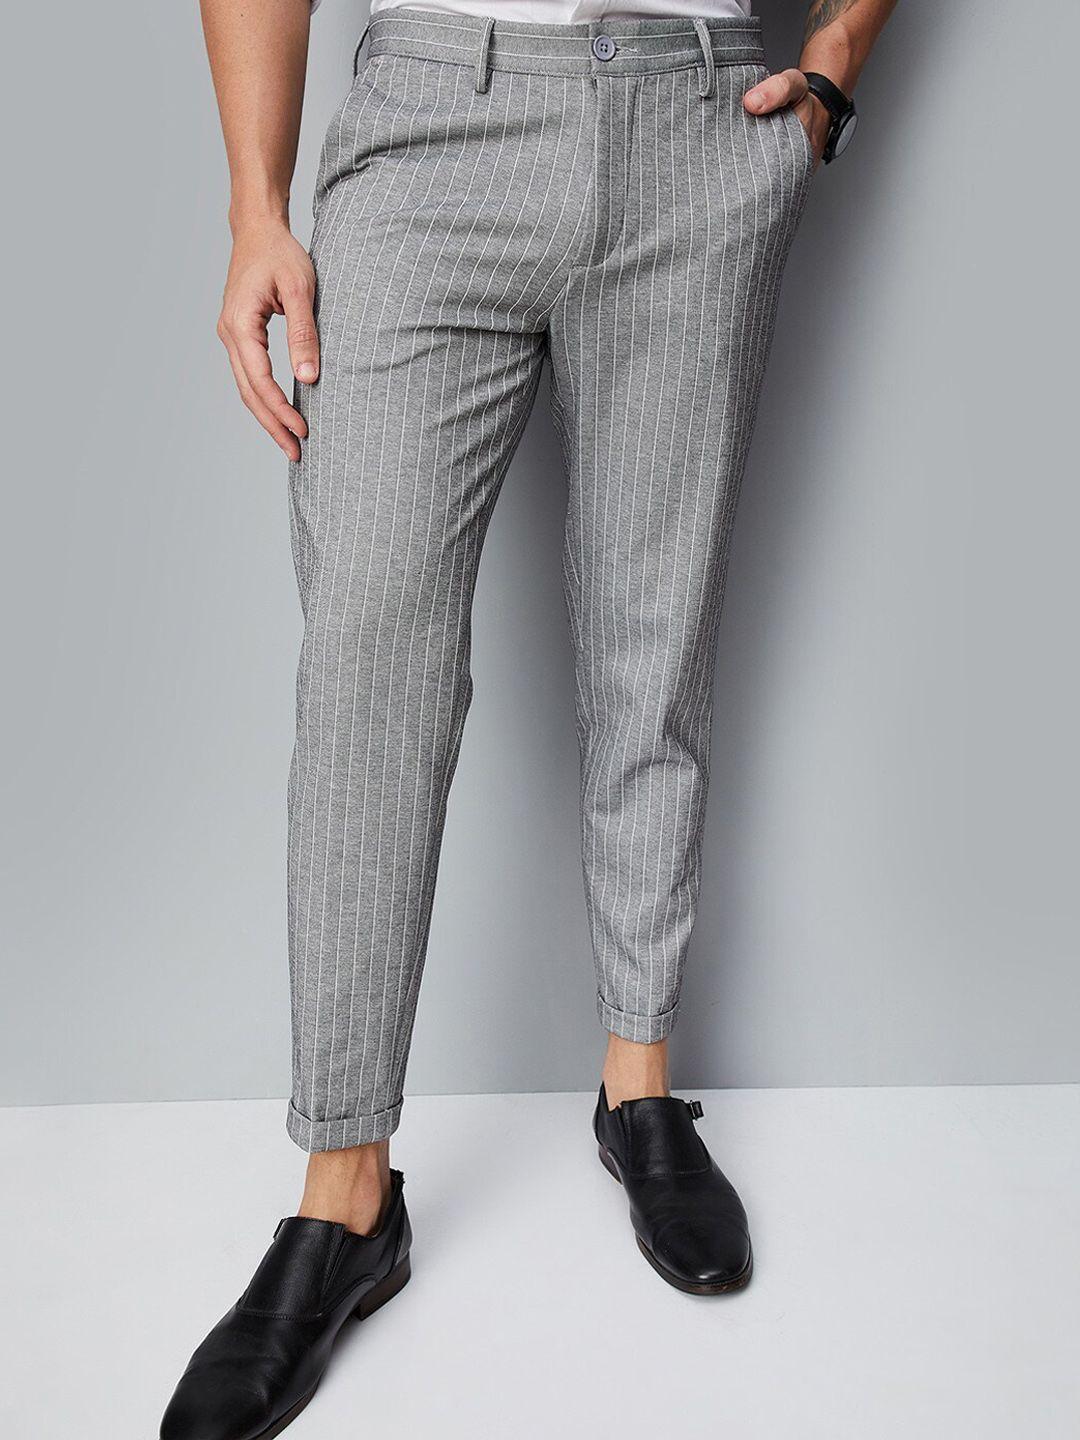 max-men-striped-relaxed-fit-formal-trousers